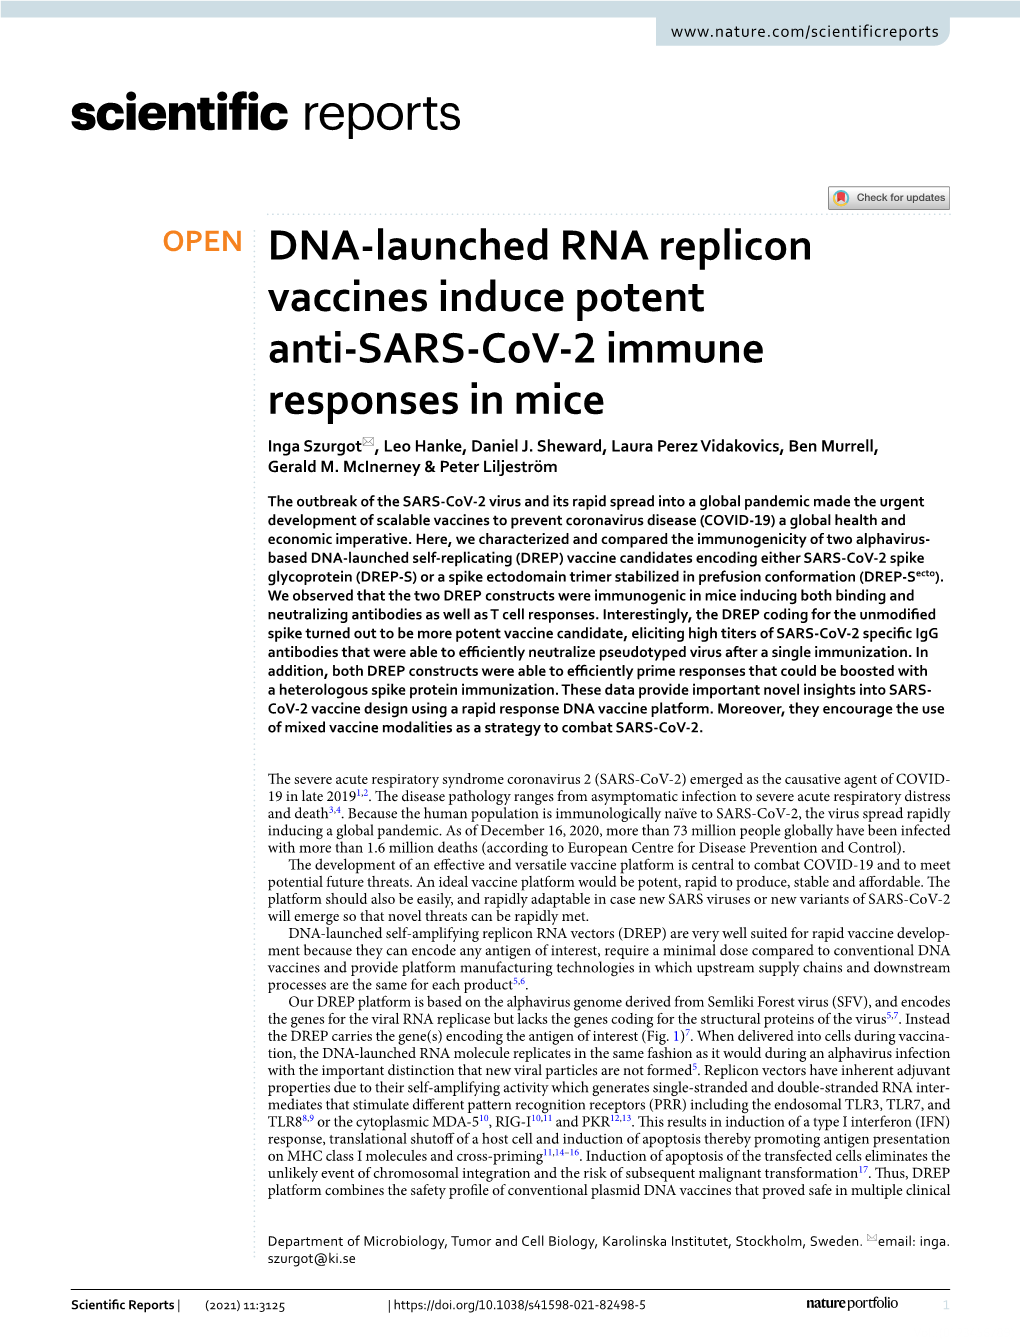 DNA-Launched RNA Replicon Vaccines Induce Potent Anti-SARS-Cov-2